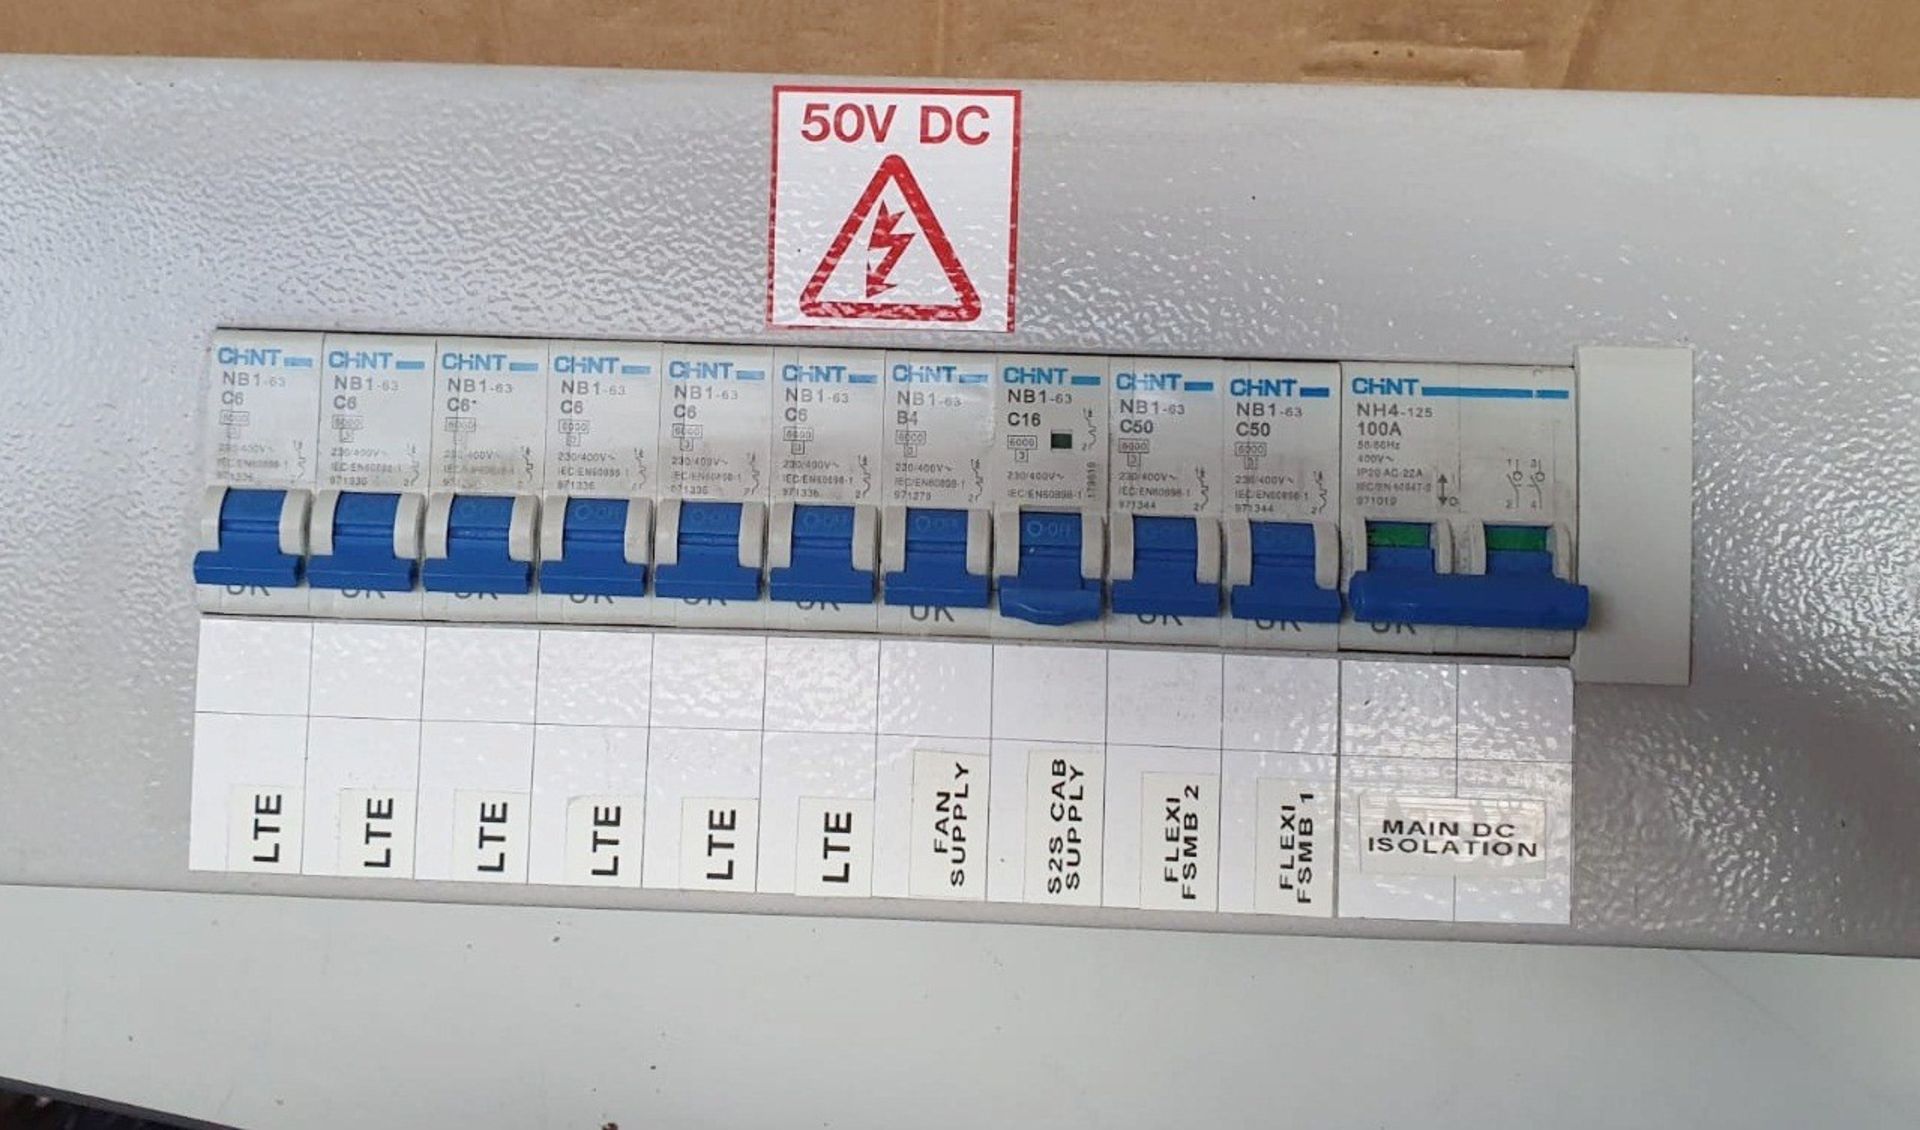 2 x Fuse Boxes - Unused Stock - £1 Start, No Reserve - Ref: WH1 - CL011 - Location: Altrincham WA14 - Image 2 of 5